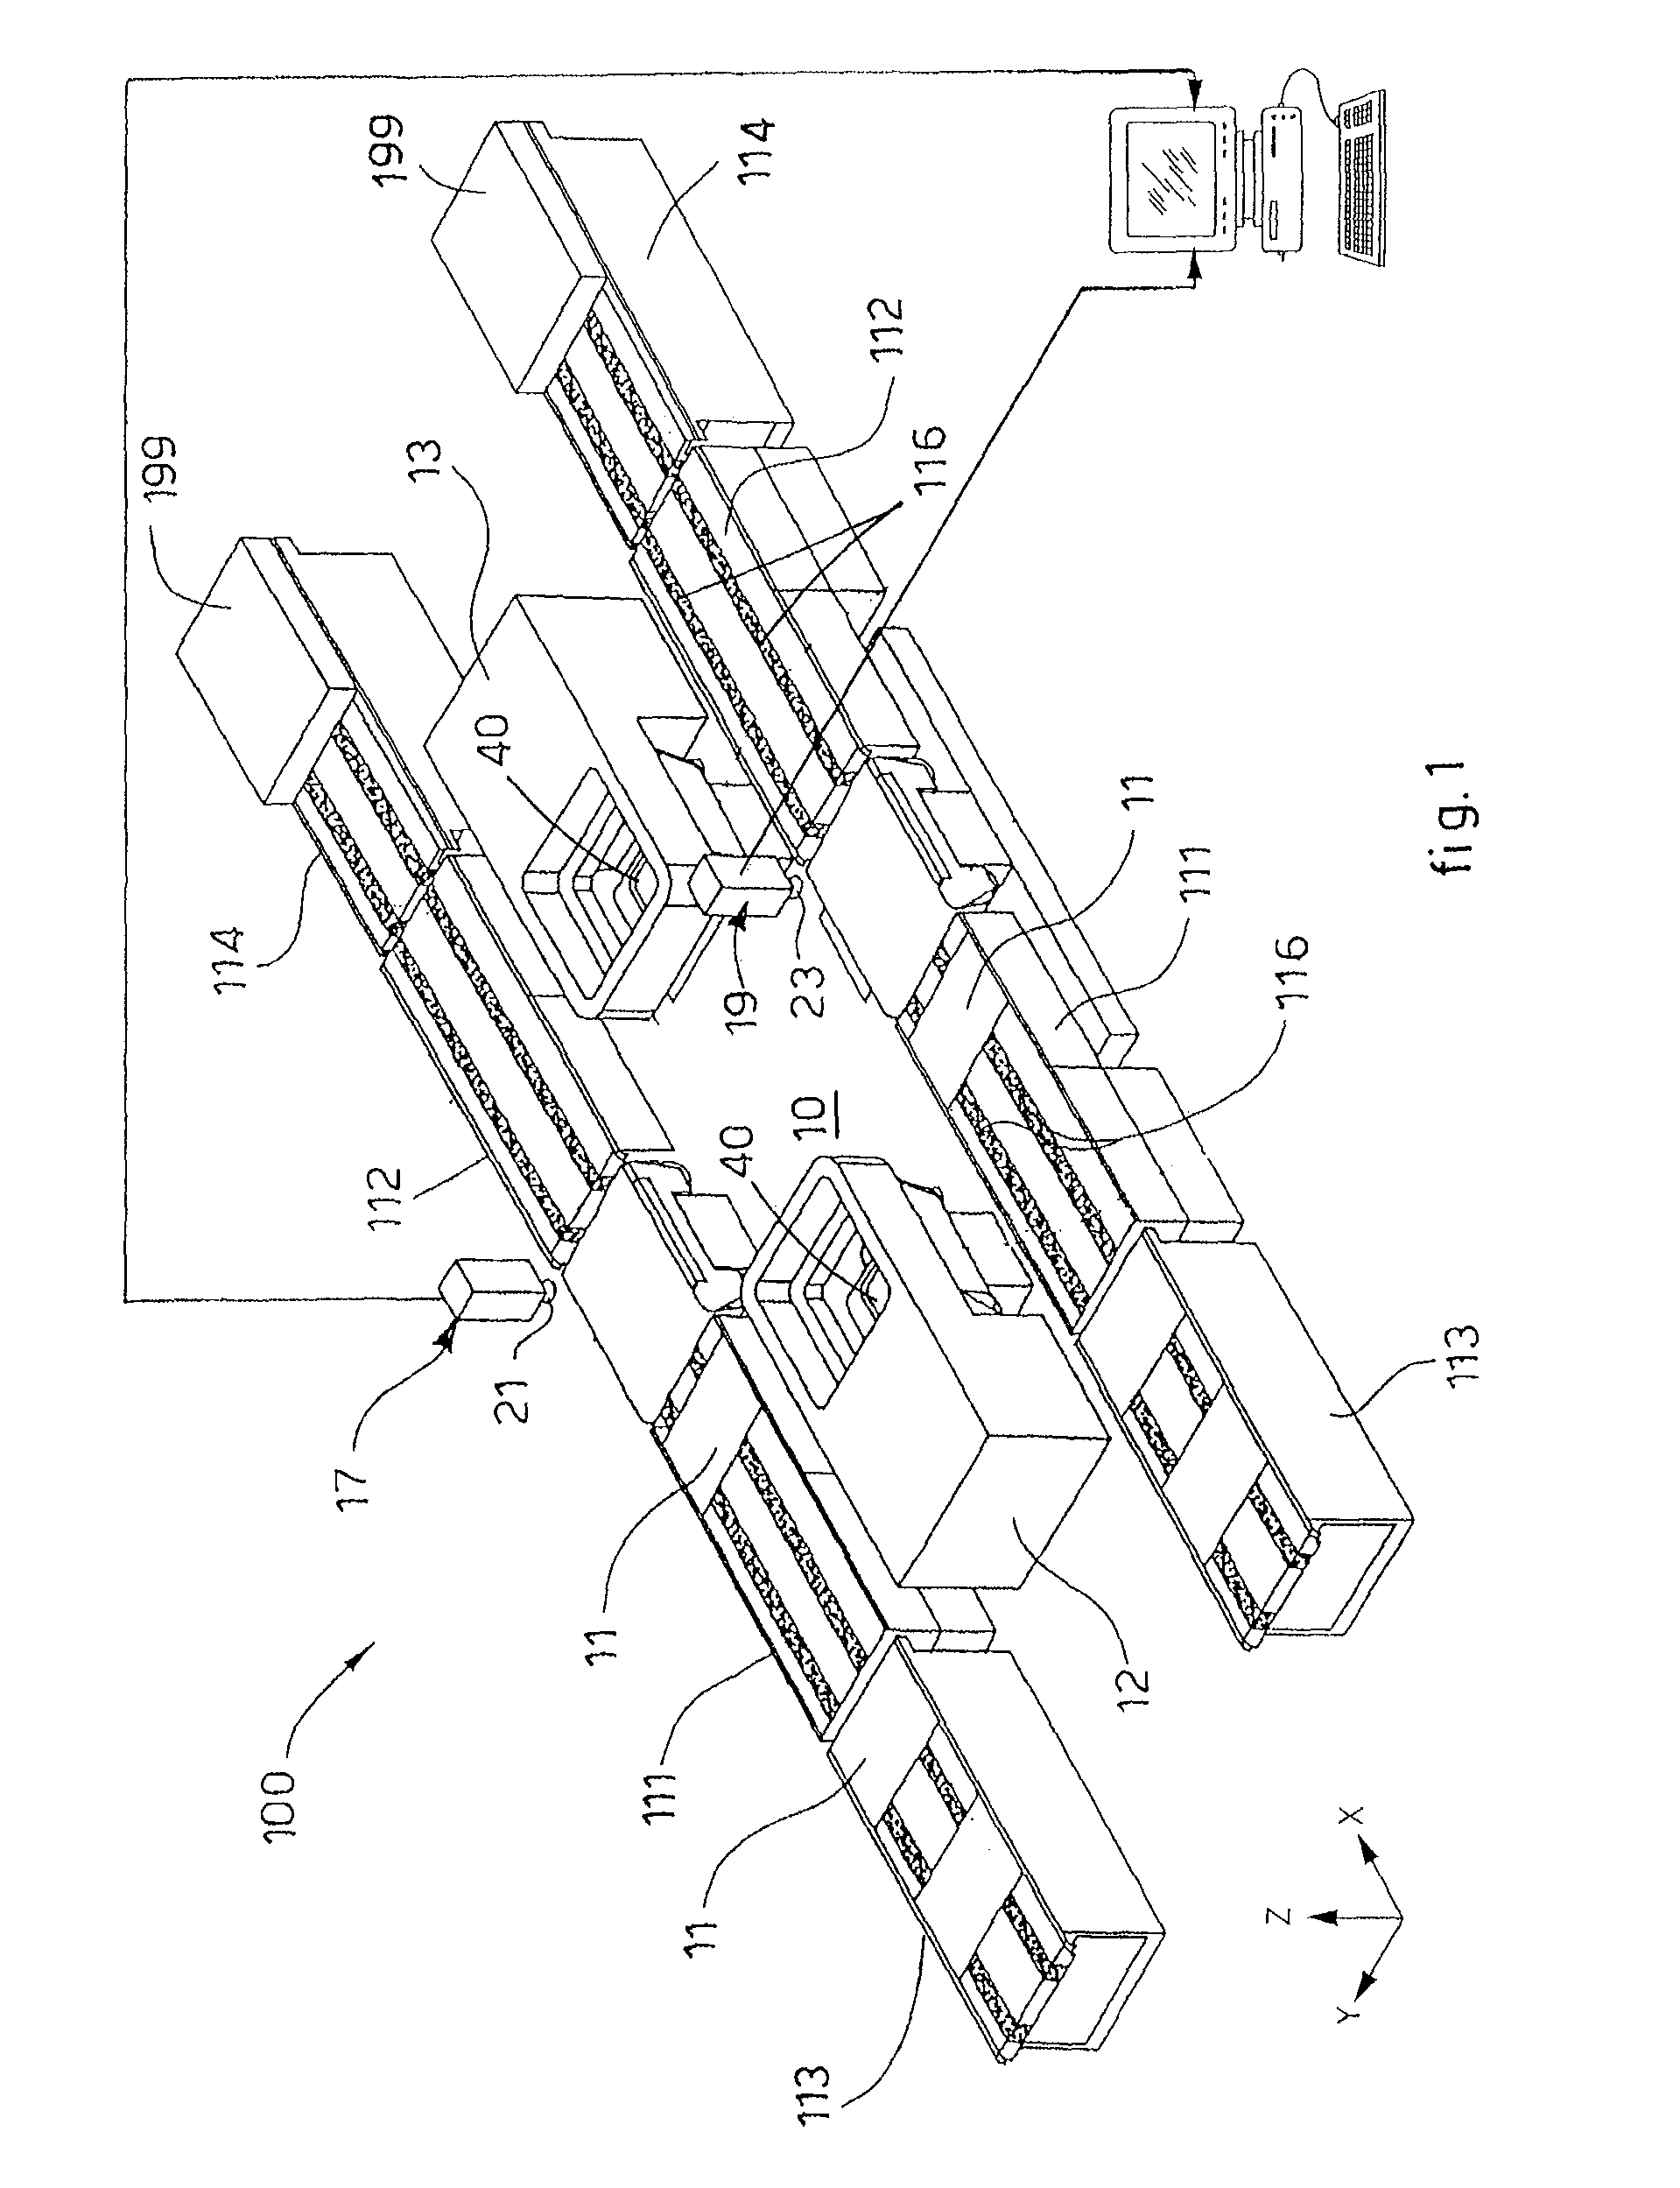 Method and Apparatus to Detect the Alignment of a Substrate